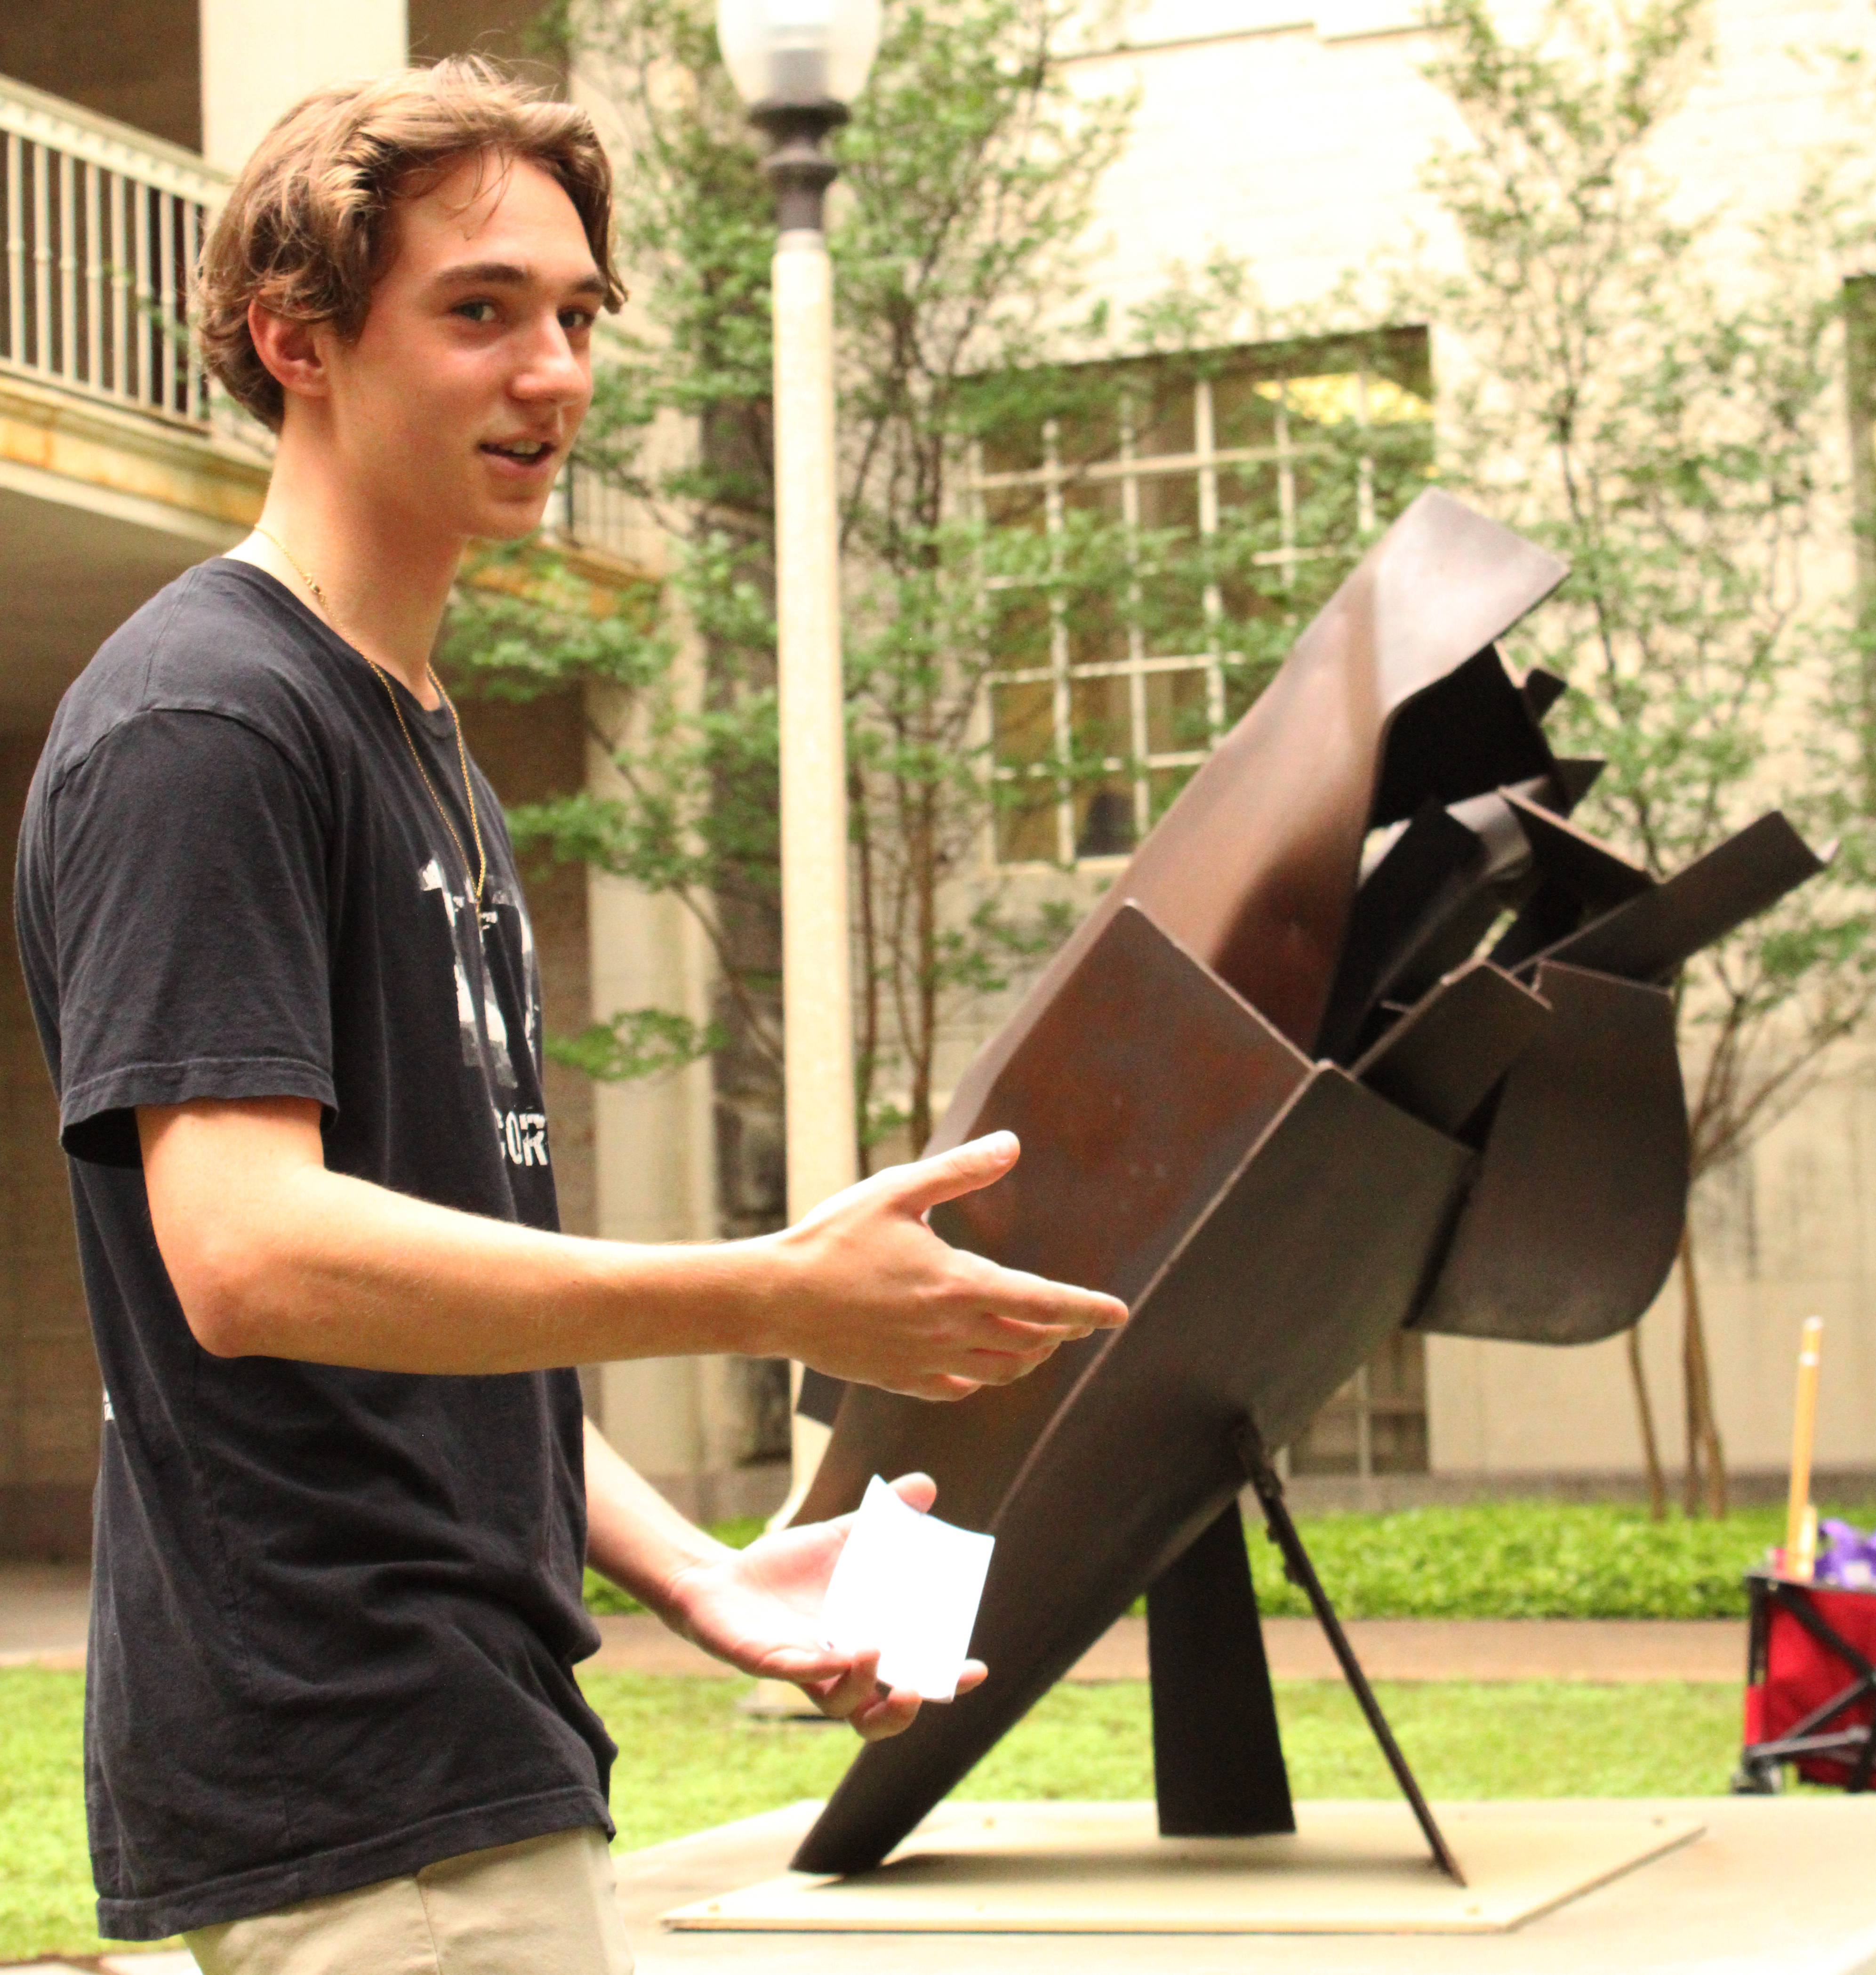 A student presents in front of "Eleanor at 7:15"; a steel sculpture